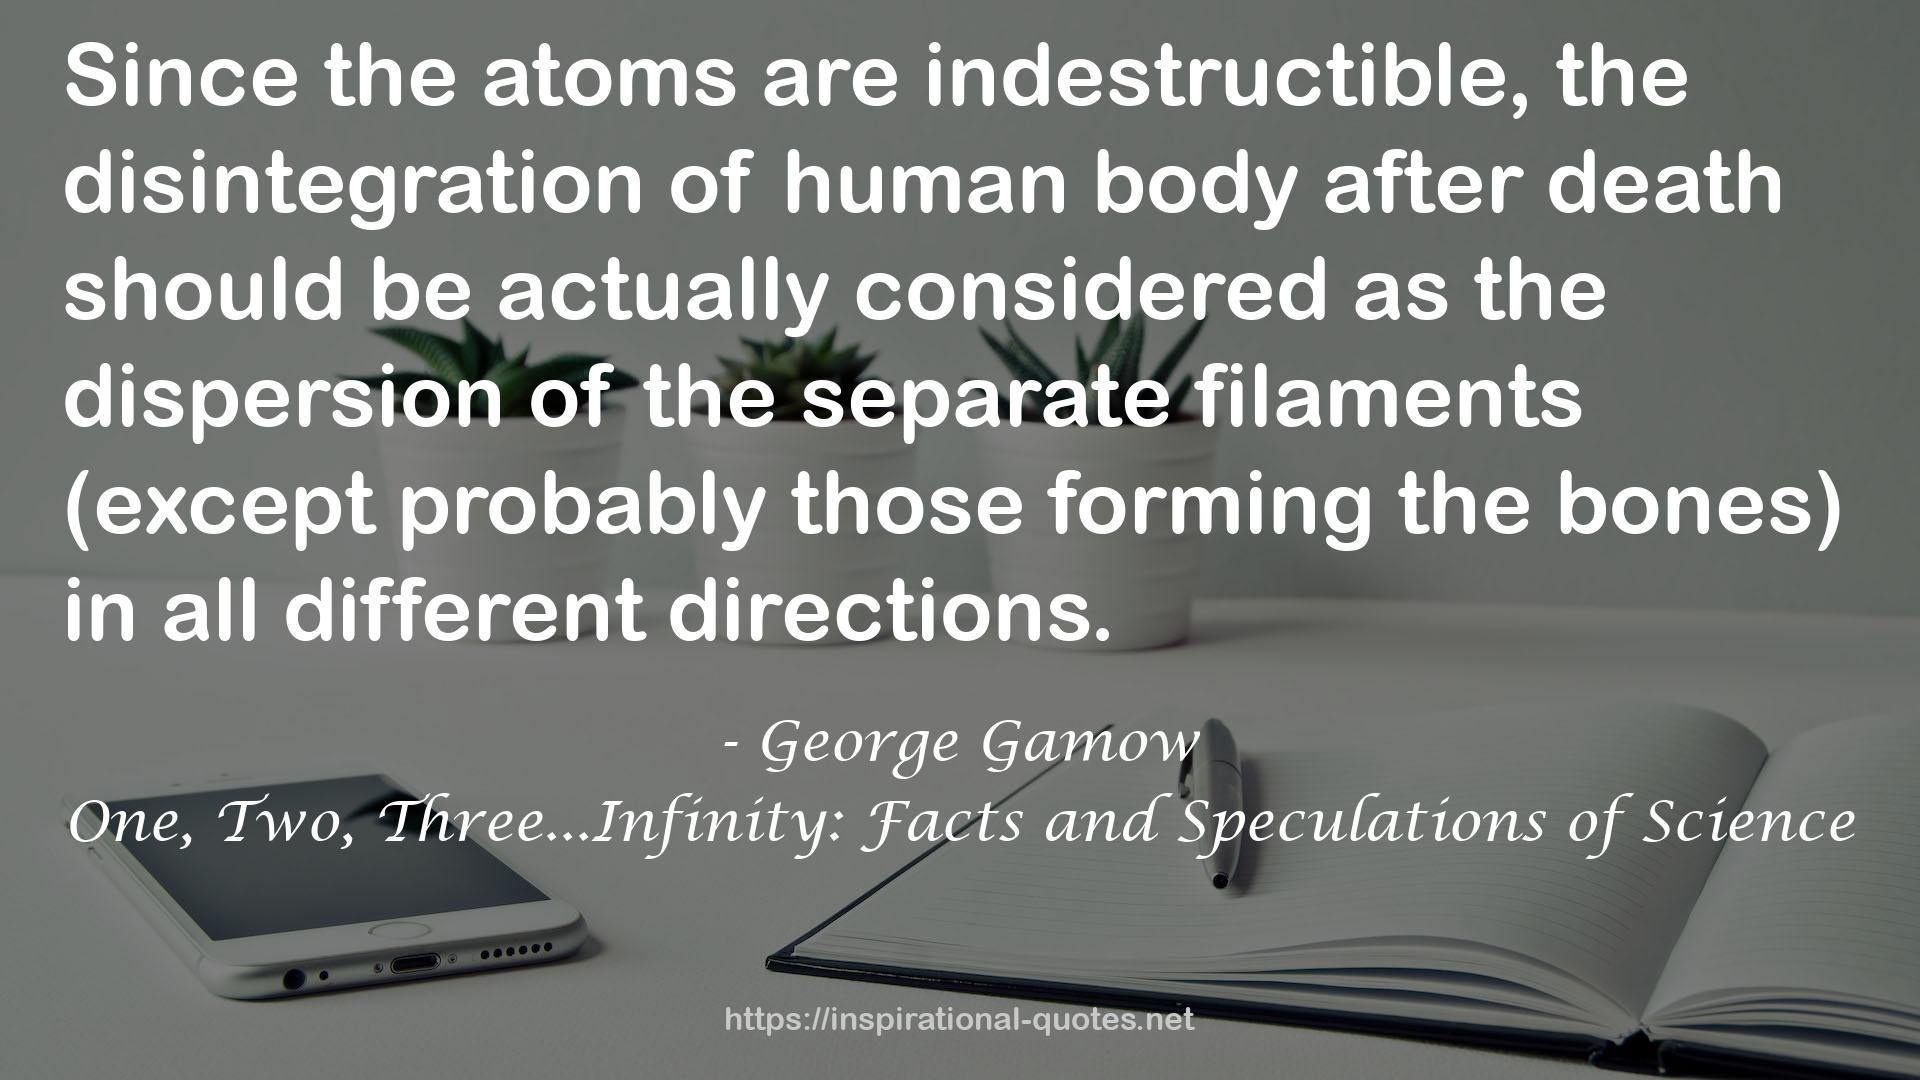 One, Two, Three...Infinity: Facts and Speculations of Science QUOTES